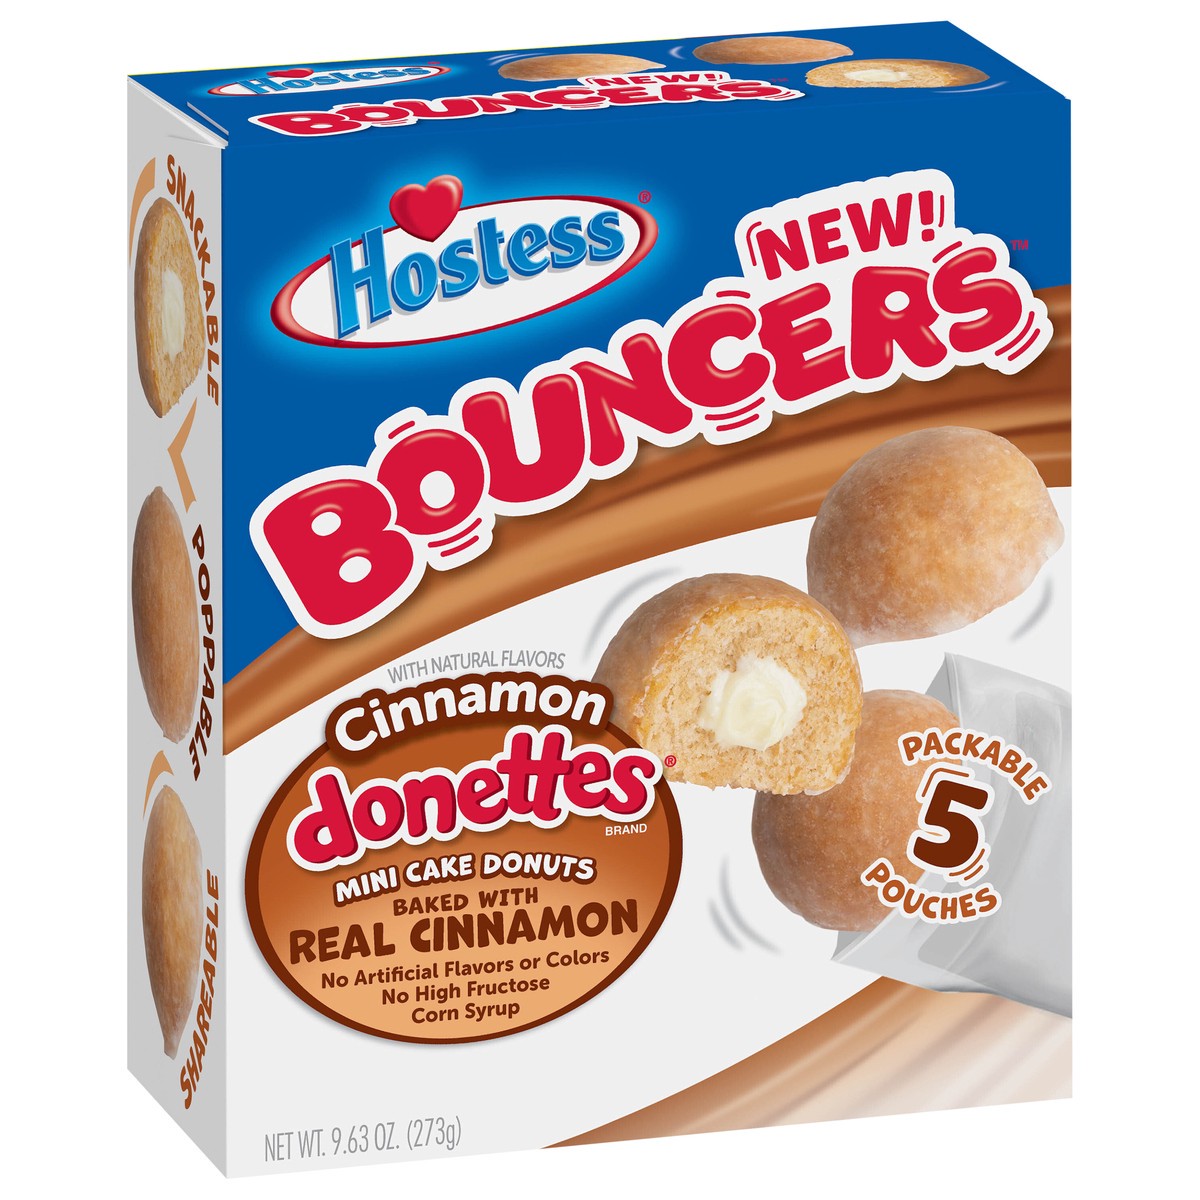 slide 8 of 9, HOSTESS BOUNCERS Cinnamon DONETTES, Packable Pouches, Perfect for Lunchboxes – 5 Pouches , 9.63 oz, 9.63 oz